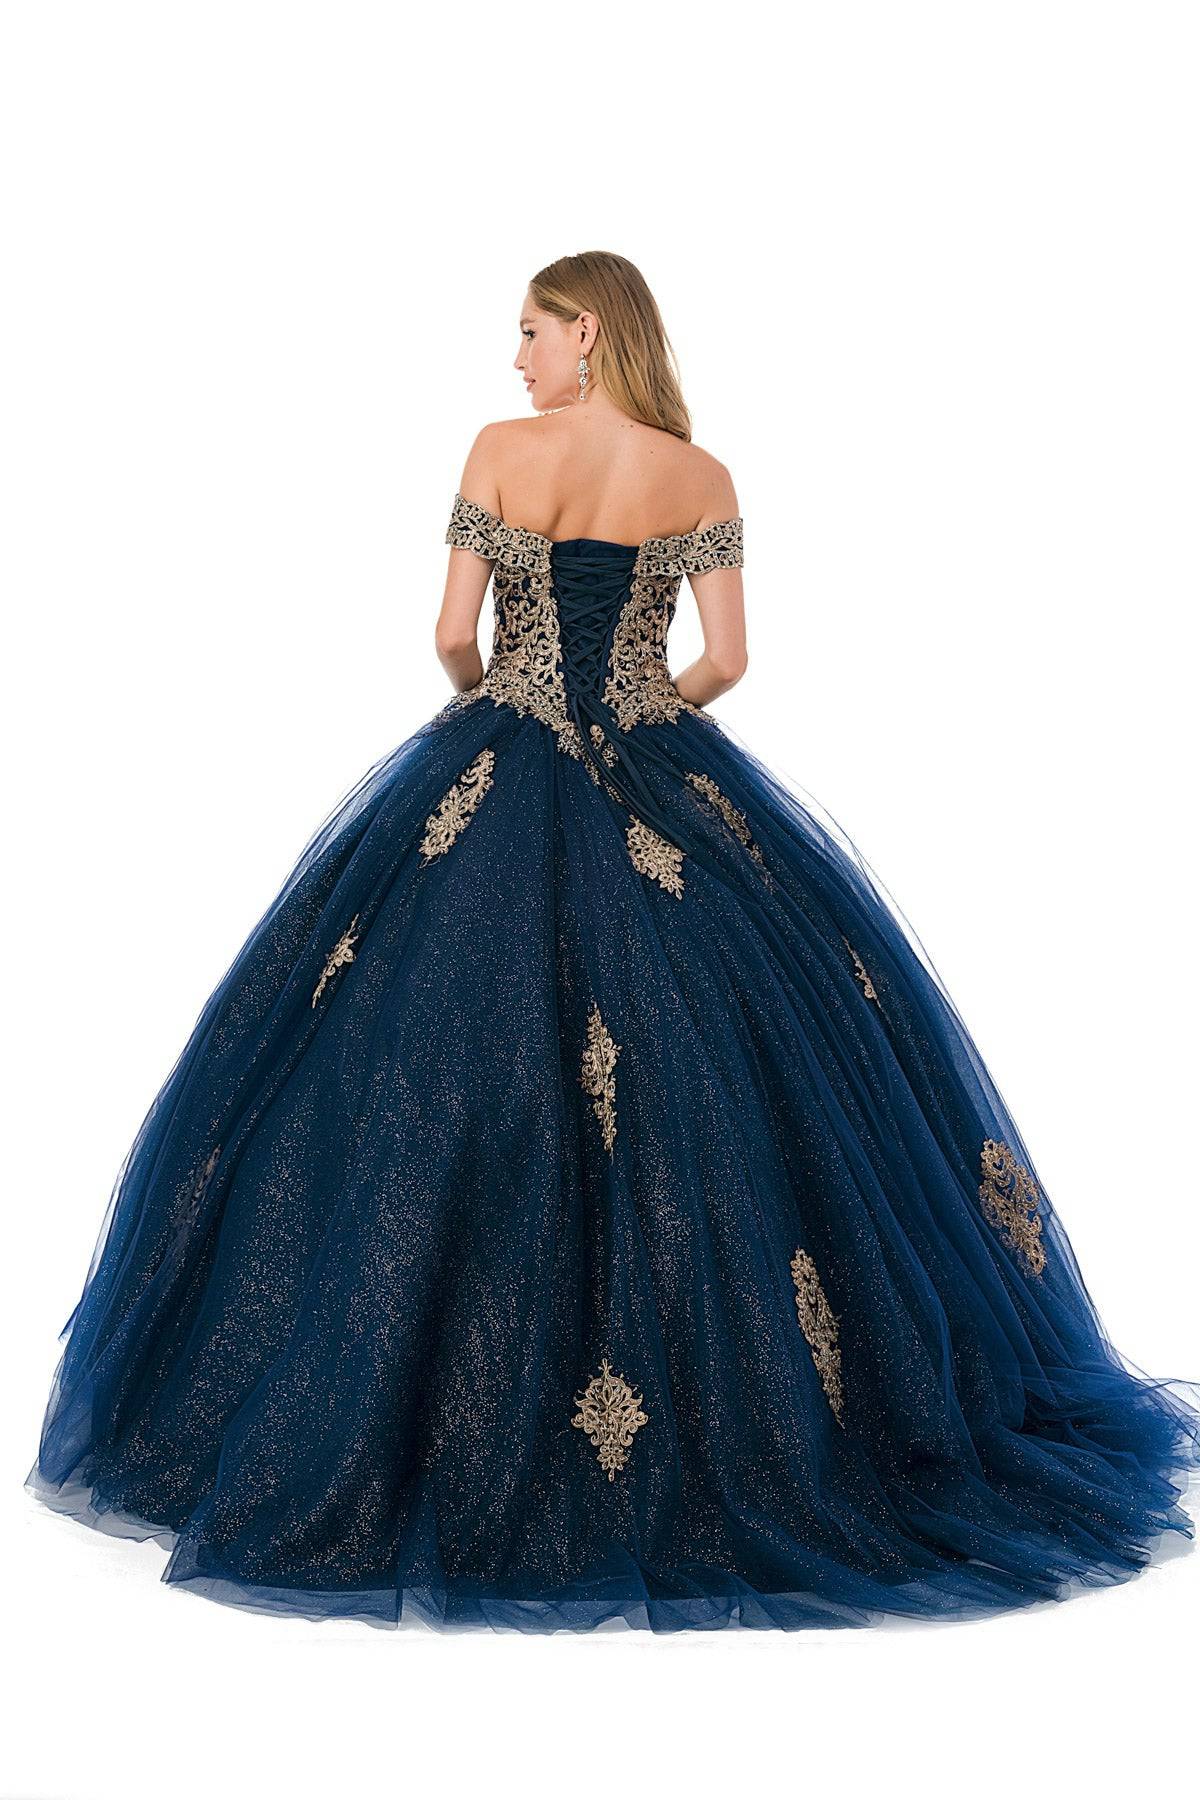 Aspeed L2779 Stunning Off Shoulder Shimmering Navy Quinceanera Dress - NORMA REED